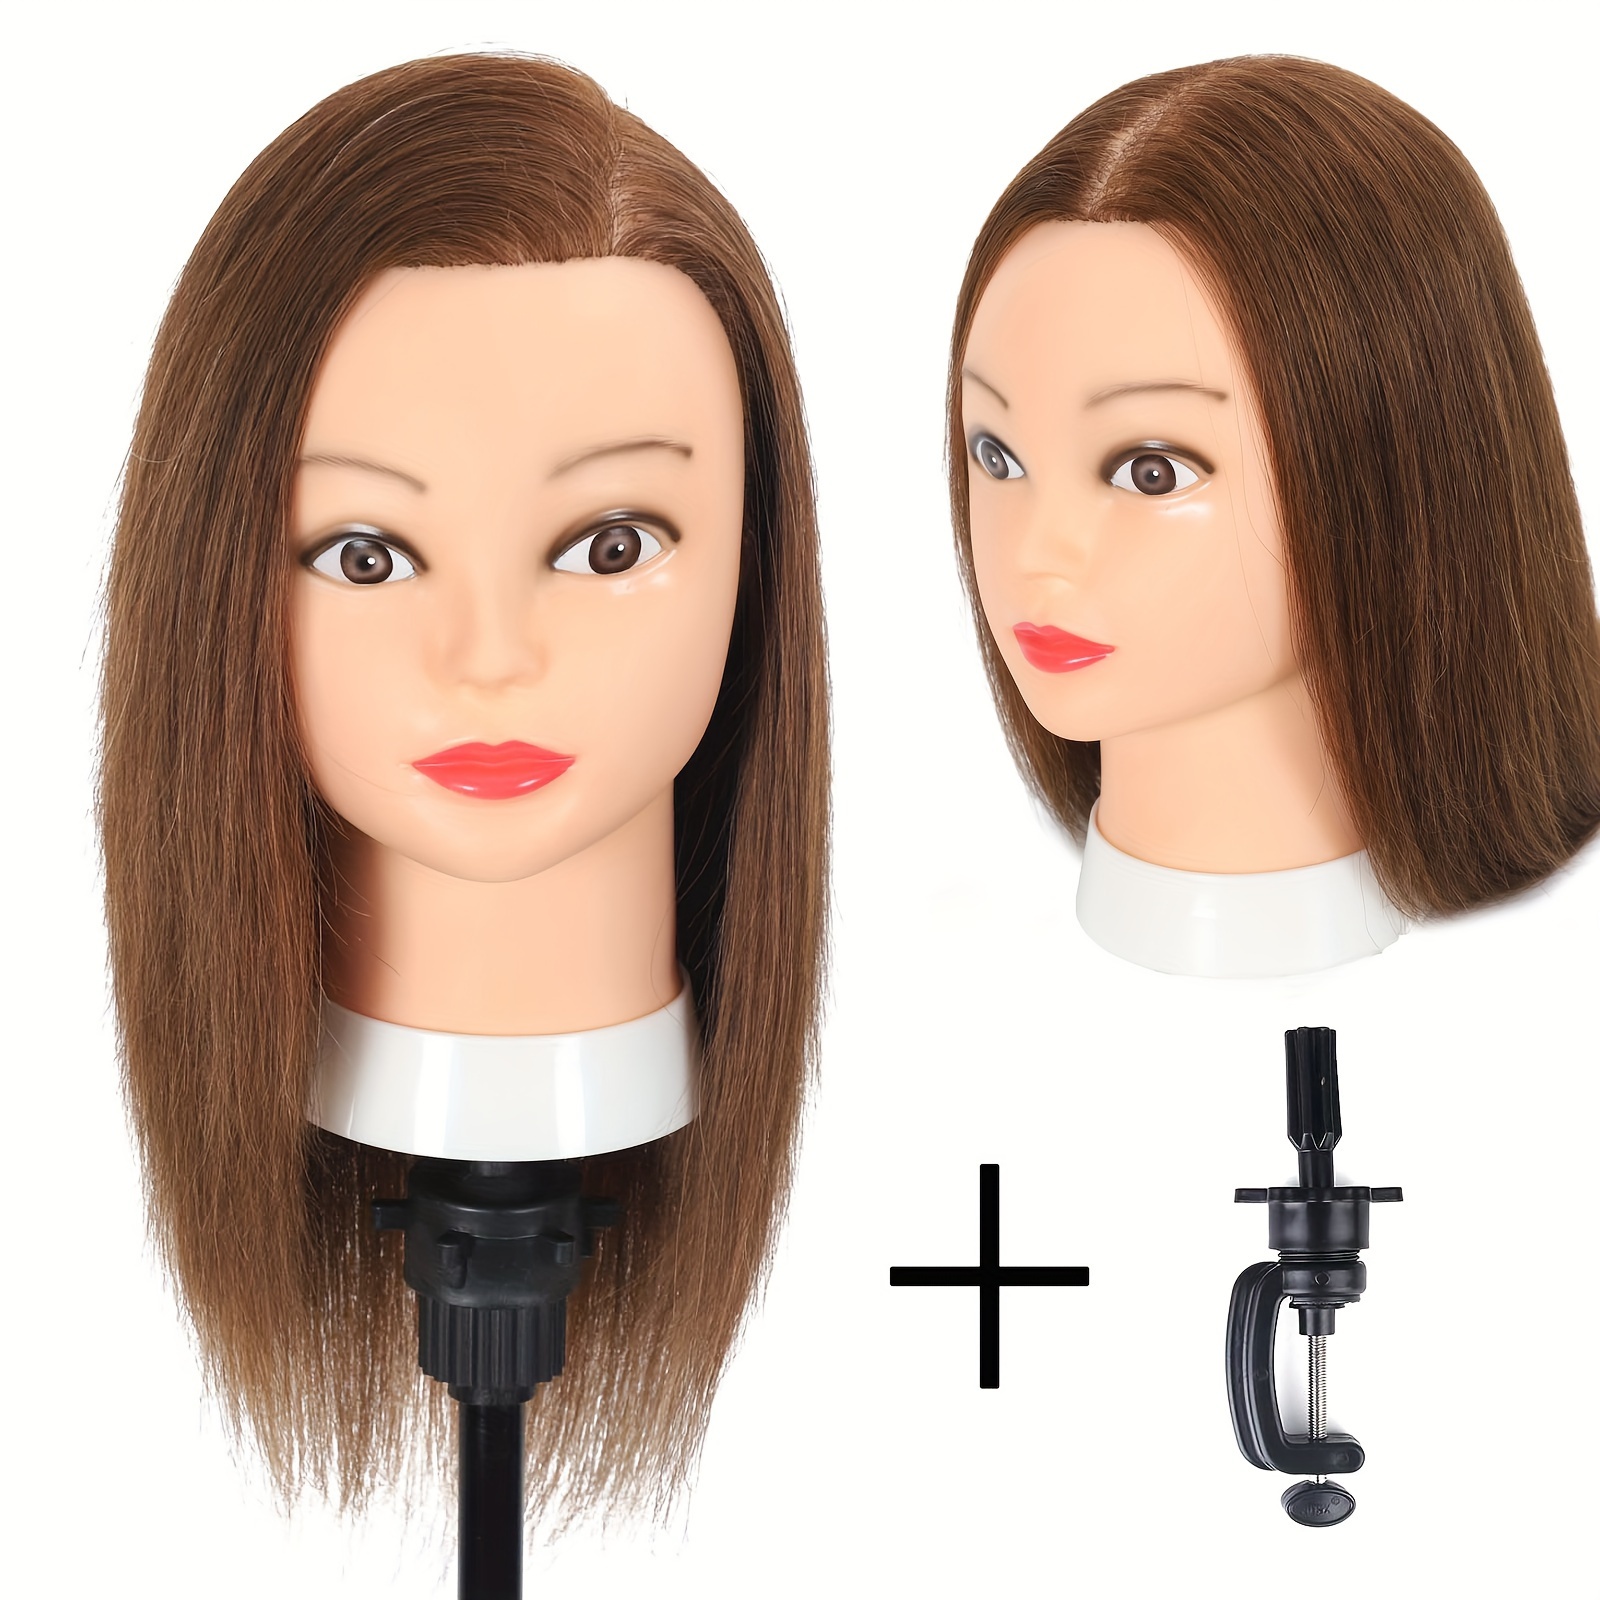 Mankainhead 100% Real Hair Mannequin Head,Training Manikin Cosmetology Doll  Head,Hairdresser Girls Practice Braiding HairStyling With Clamp